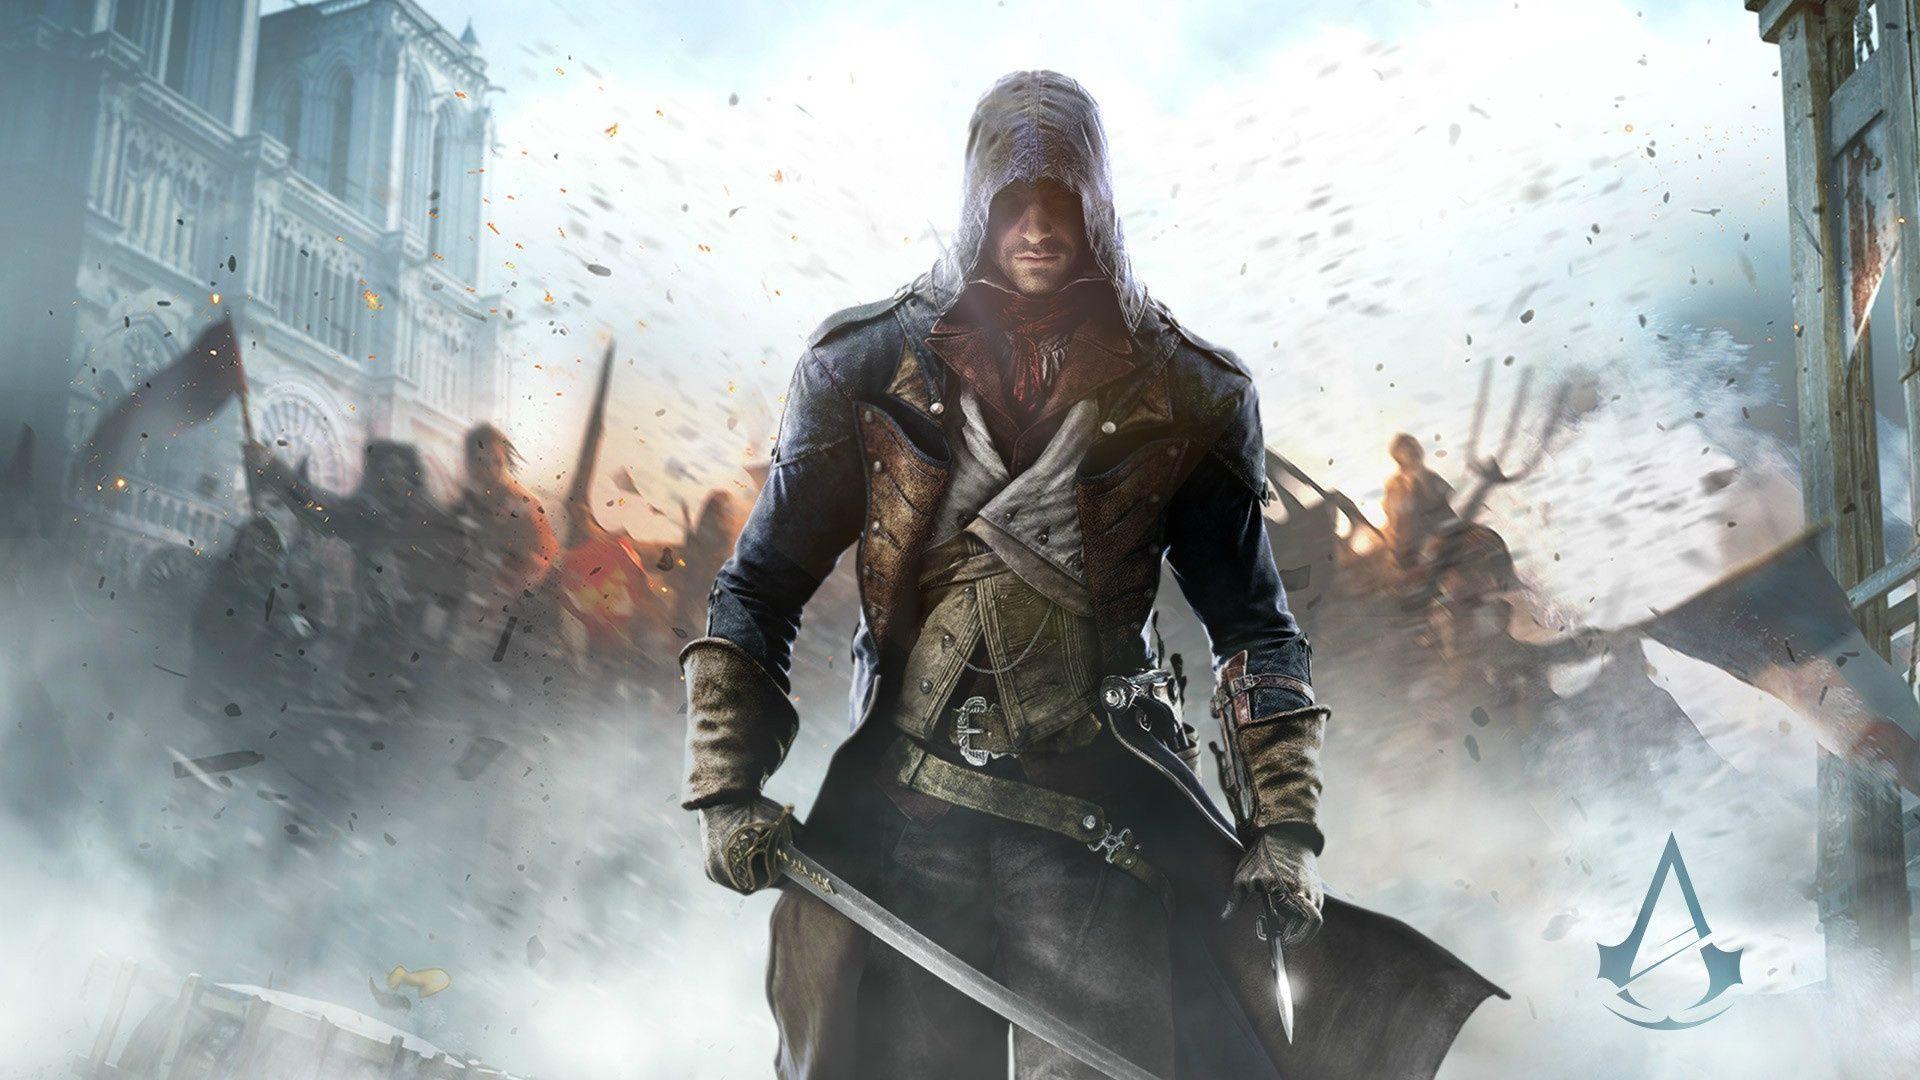 Assassin's Creed Unity Wallpaper in jpg format for free download